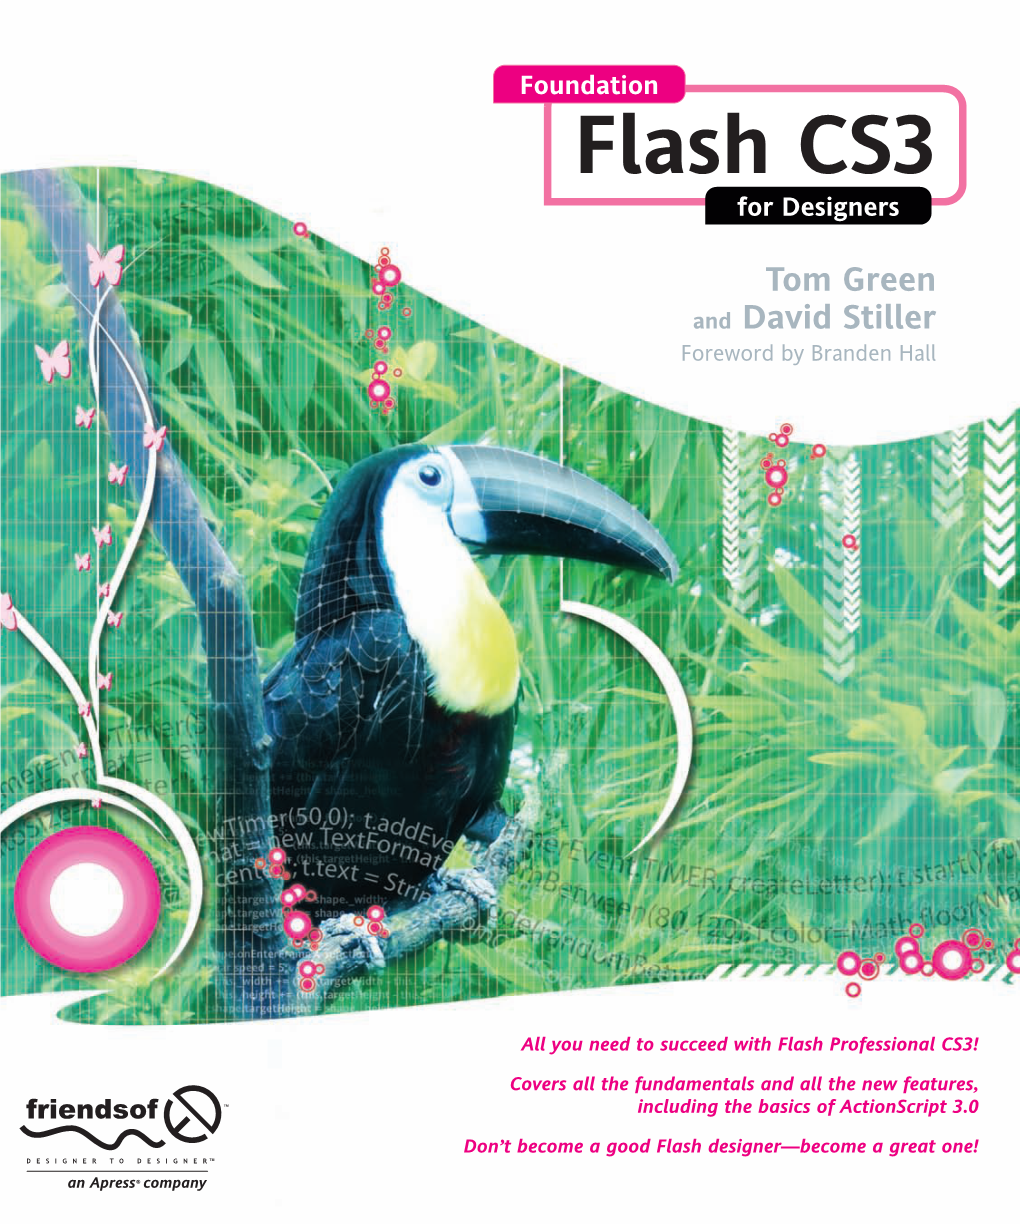 Foundation Flash CS3 for Designers F You Are a Flash Designer Looking for a Solid Foundation in Flash CS3, This Book Is Ifor You